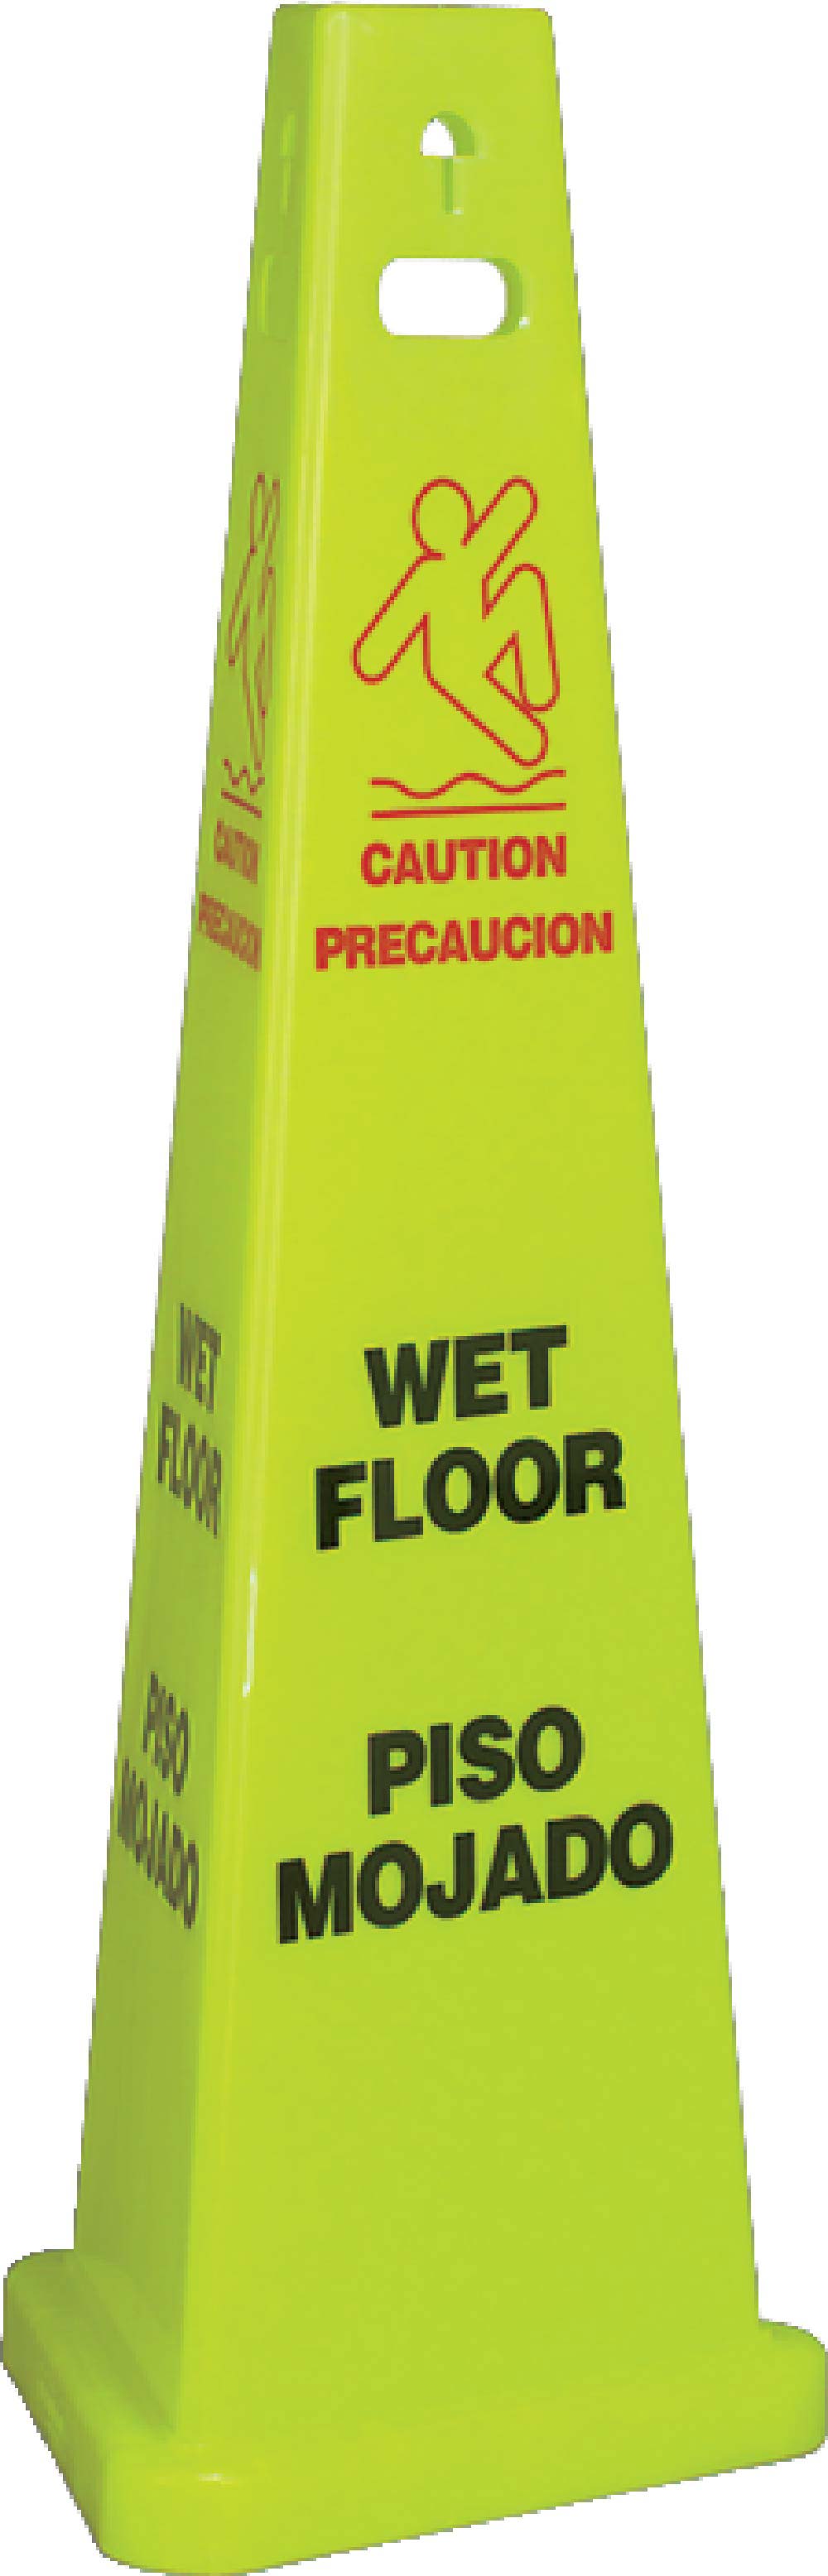 Wet Floor Bilingual Trivu 3-Sided Safety Cone - Case of 3-eSafety Supplies, Inc